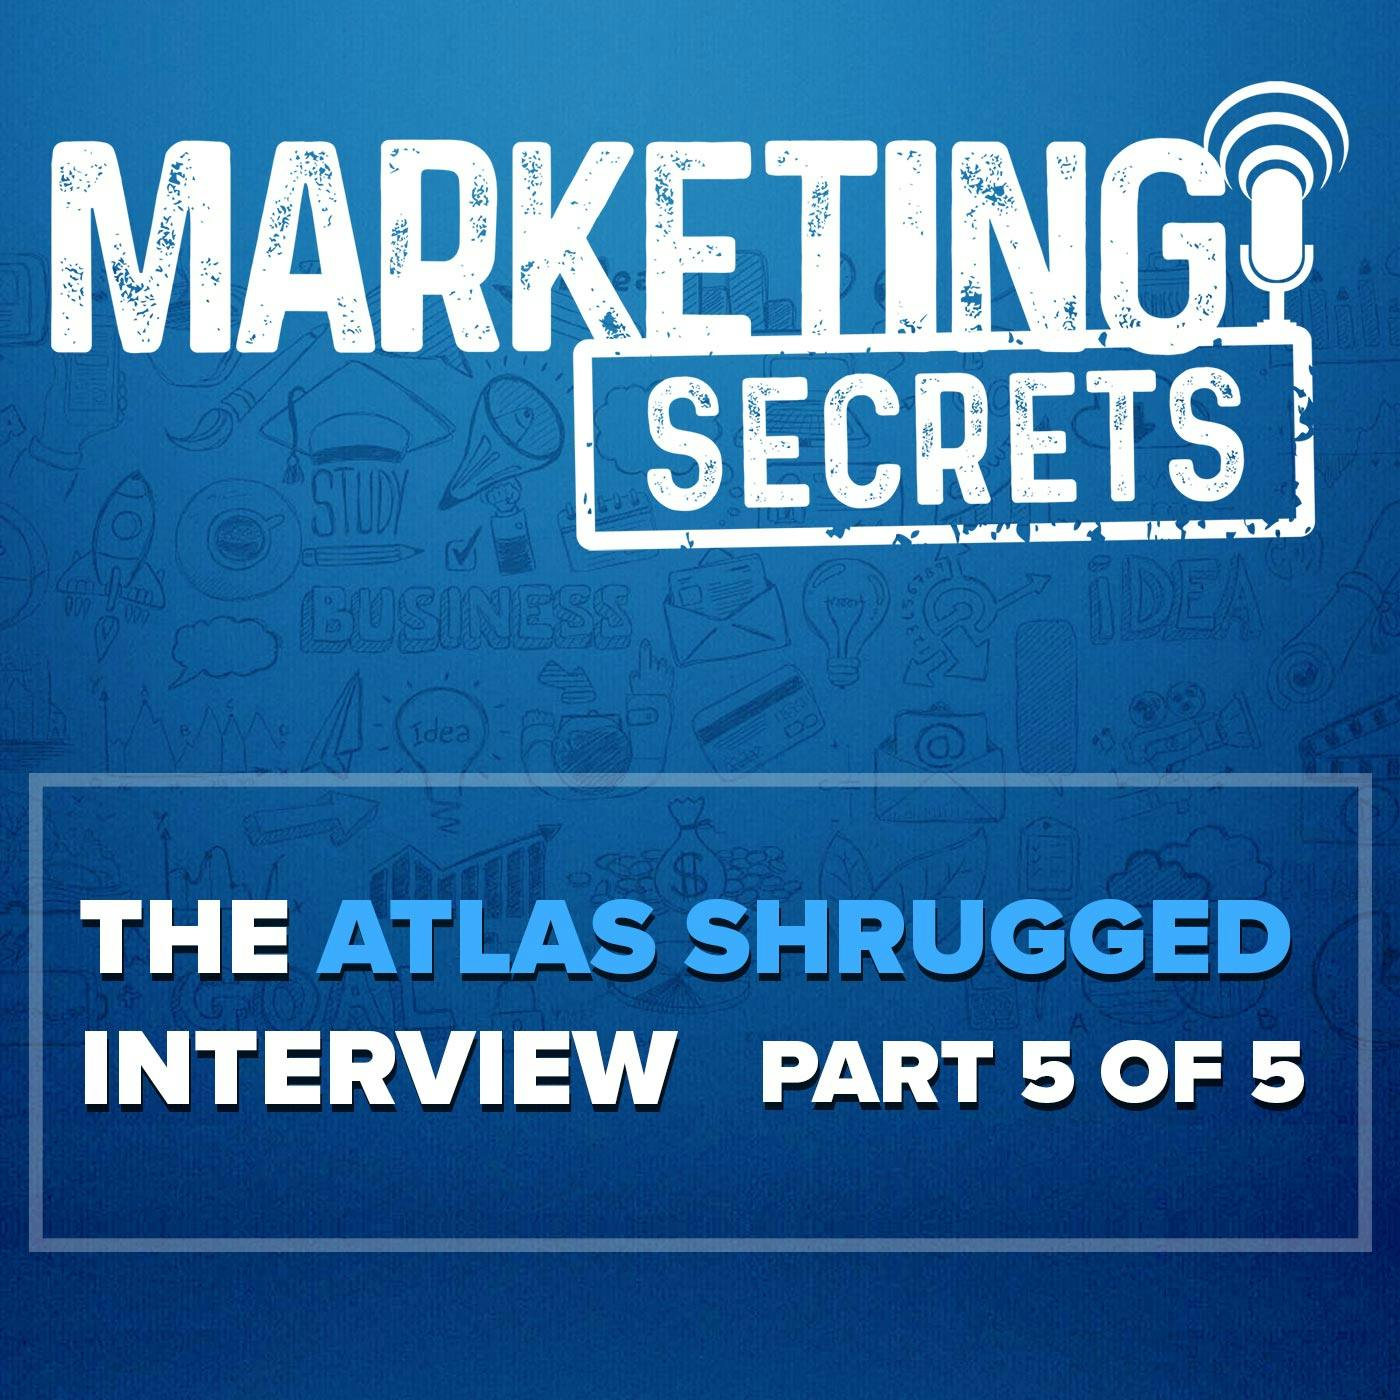 The Atlas Shrugged Interview - Part 5 of 5